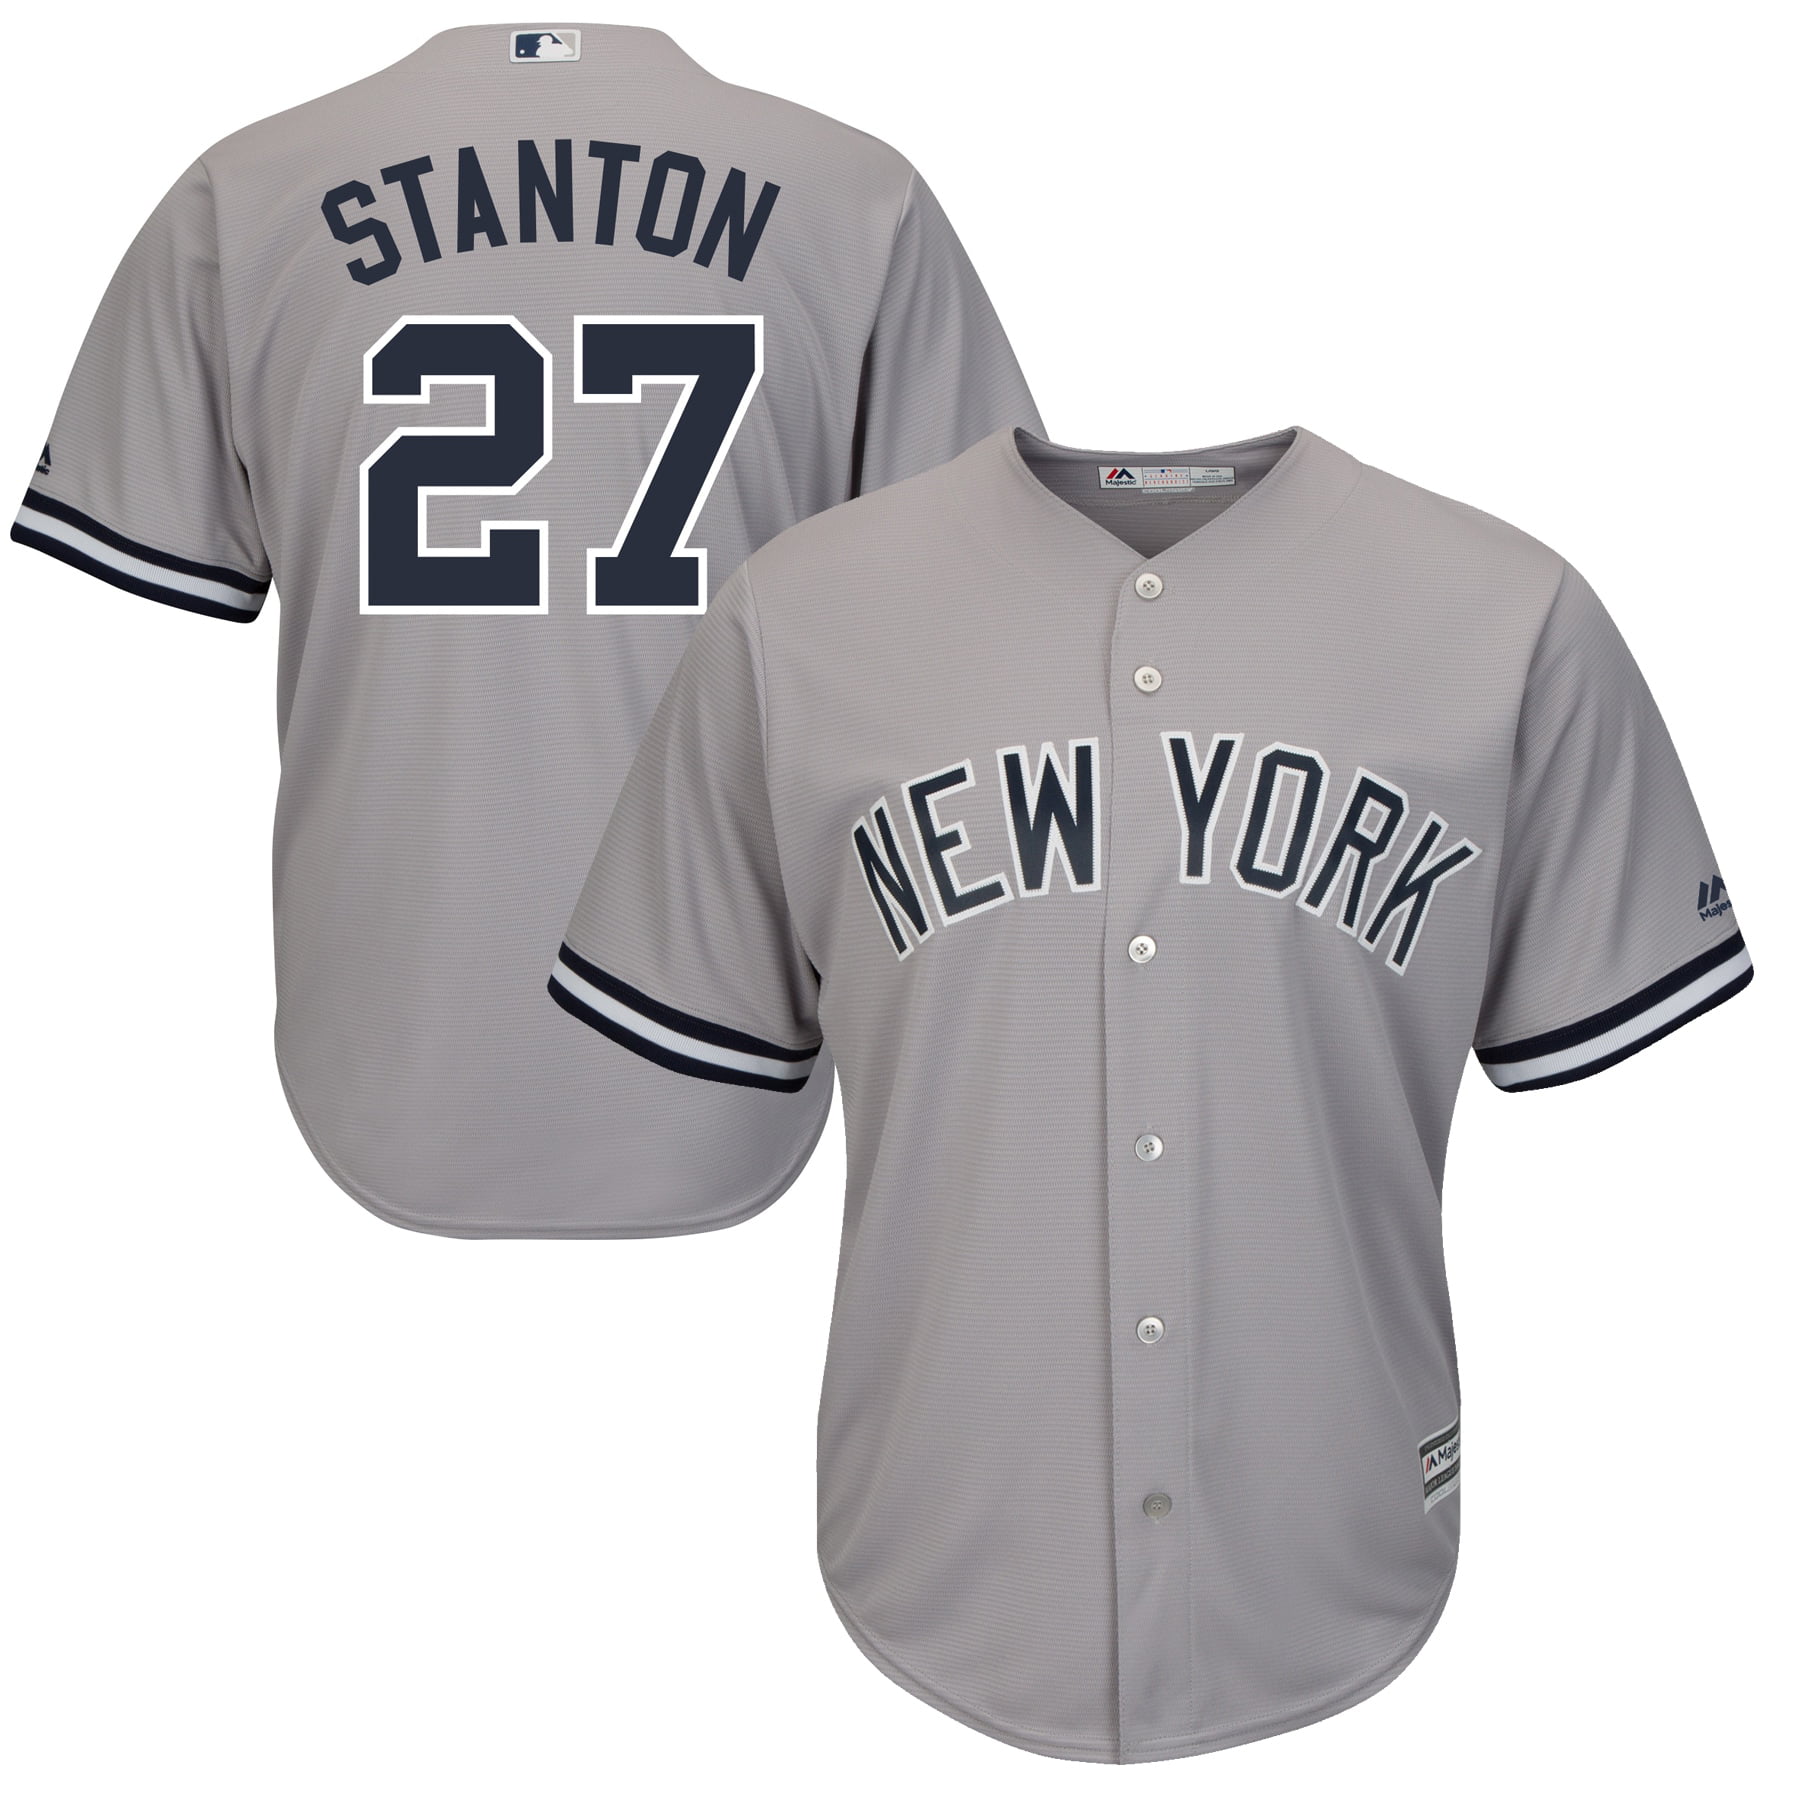 yankees jersey youth